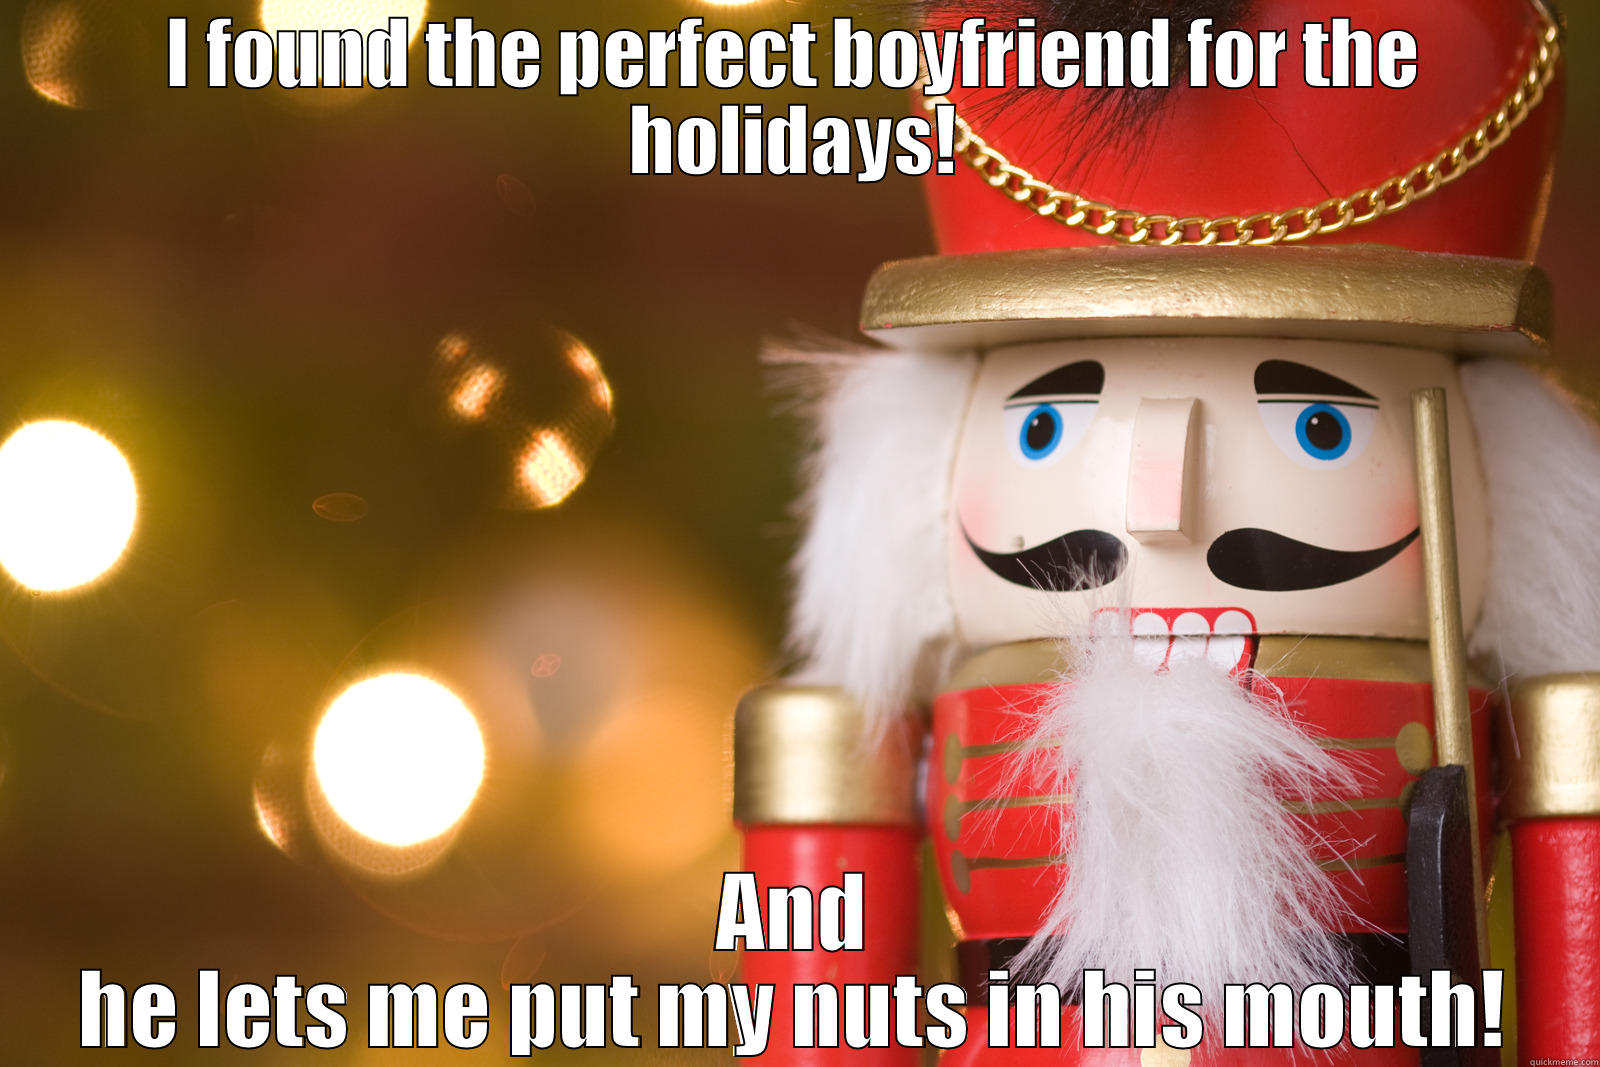 I FOUND THE PERFECT BOYFRIEND FOR THE HOLIDAYS! AND HE LETS ME PUT MY NUTS IN HIS MOUTH! Misc